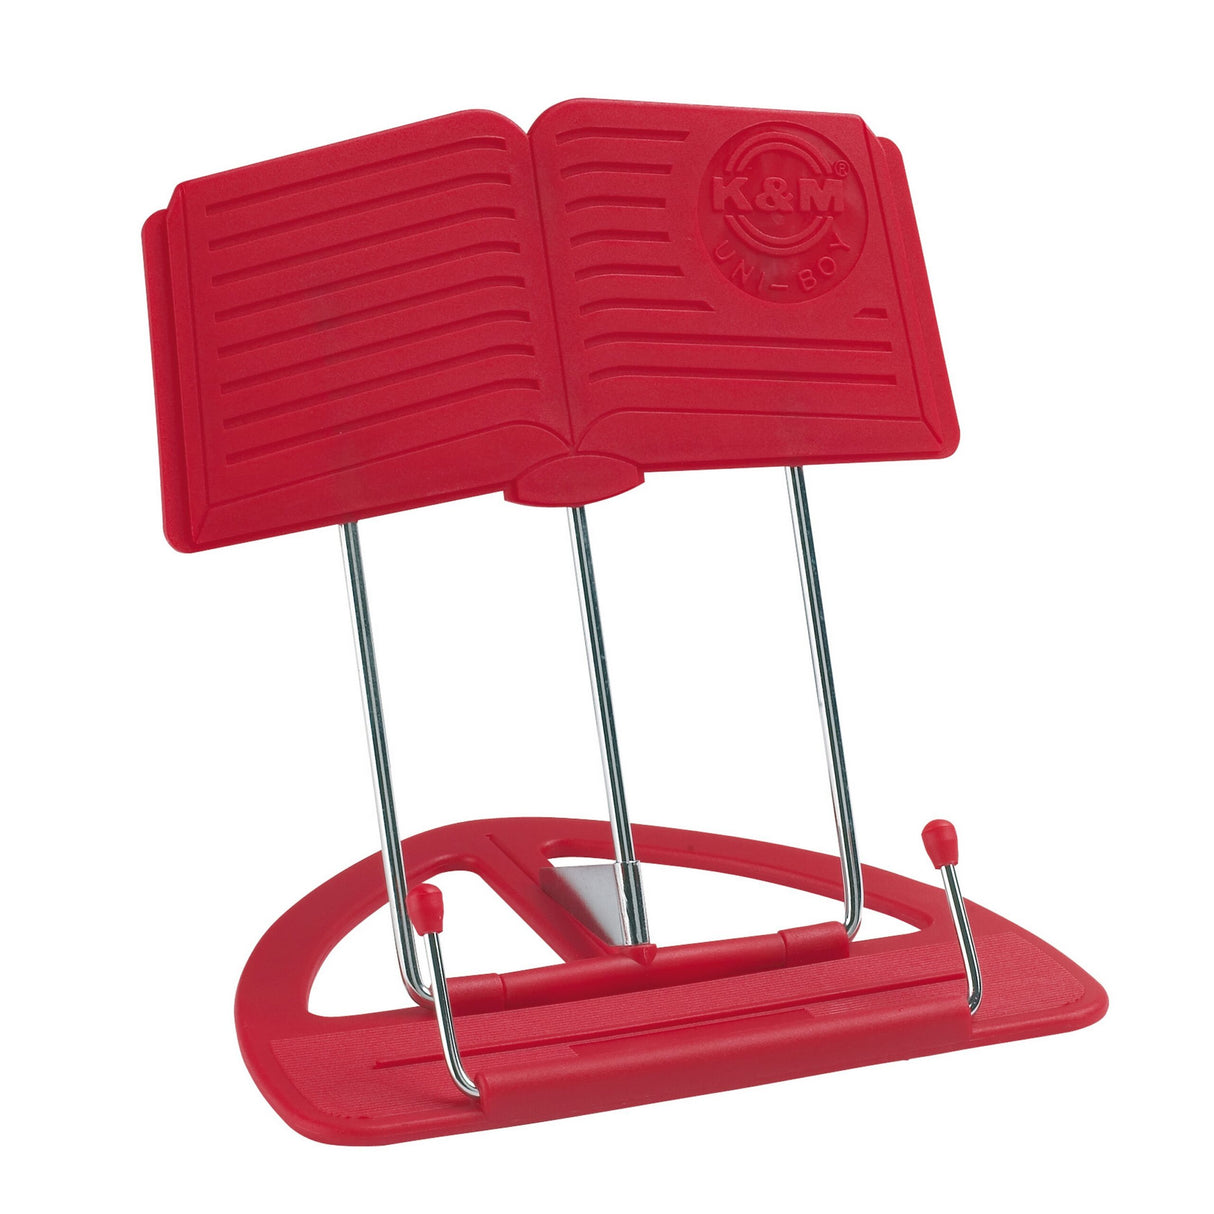 K&M 12450 Uni-Boy Classic Stand, Red, 12-Pieces